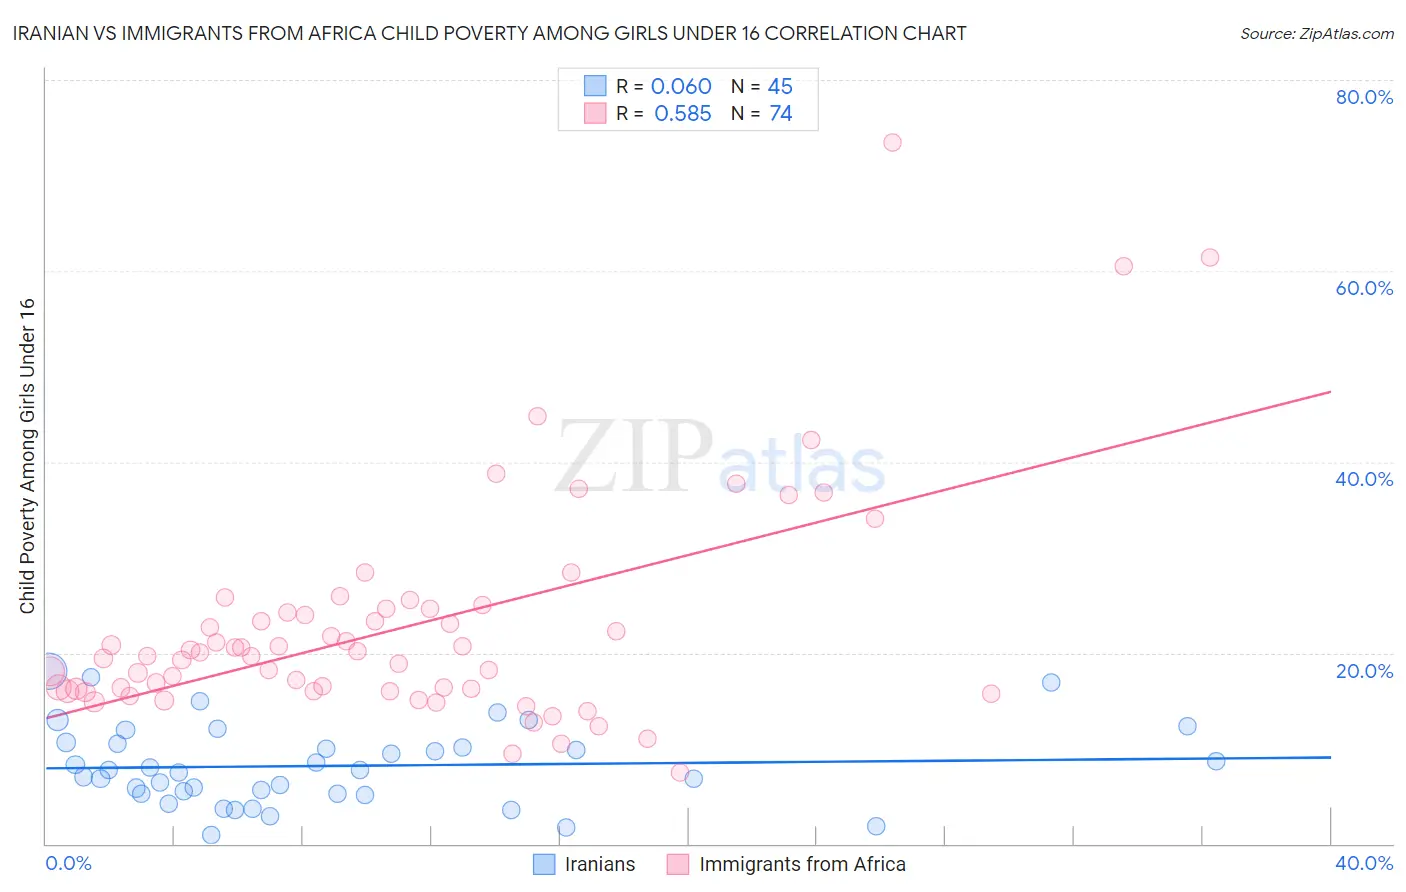 Iranian vs Immigrants from Africa Child Poverty Among Girls Under 16